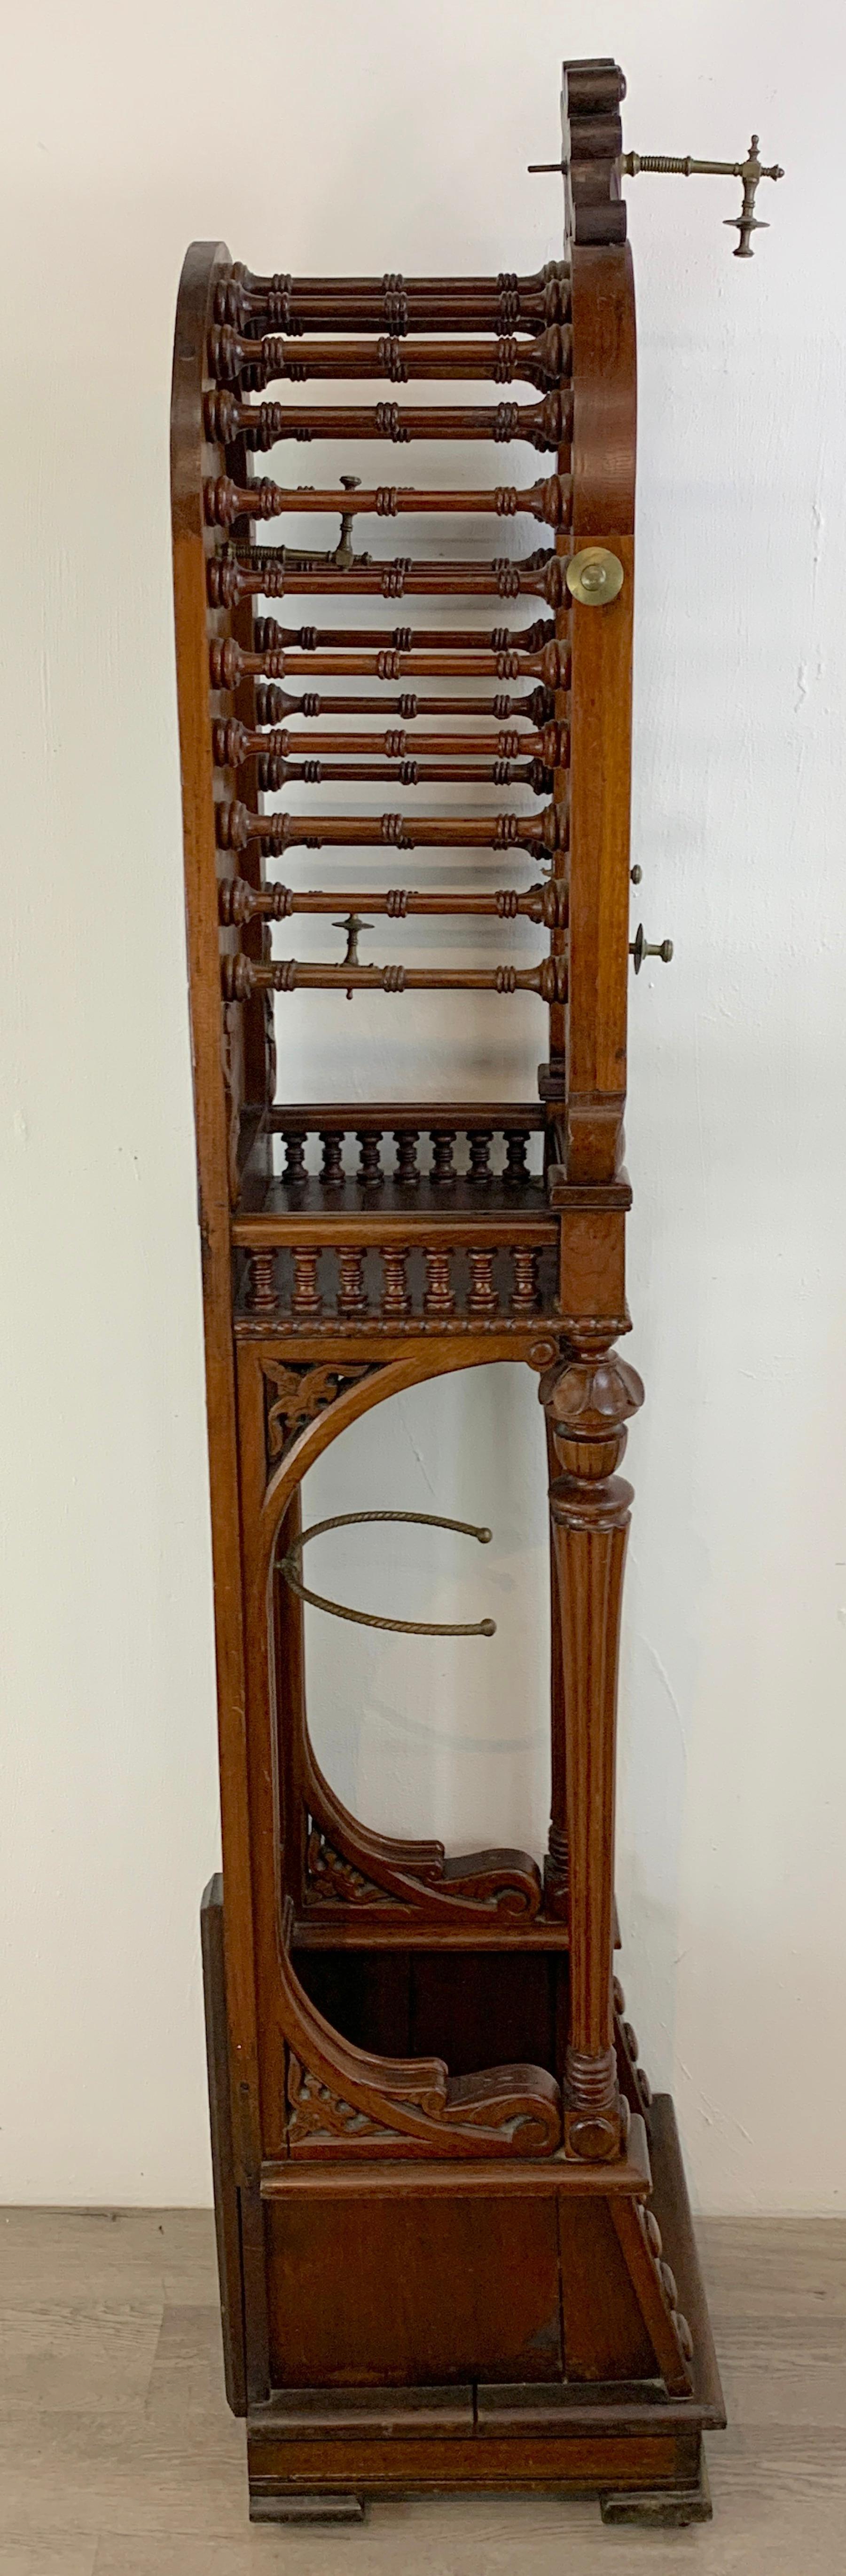 19th Century High Victorian Stick and Ball Variation Hall Rack, Attributed to Hunzinger For Sale